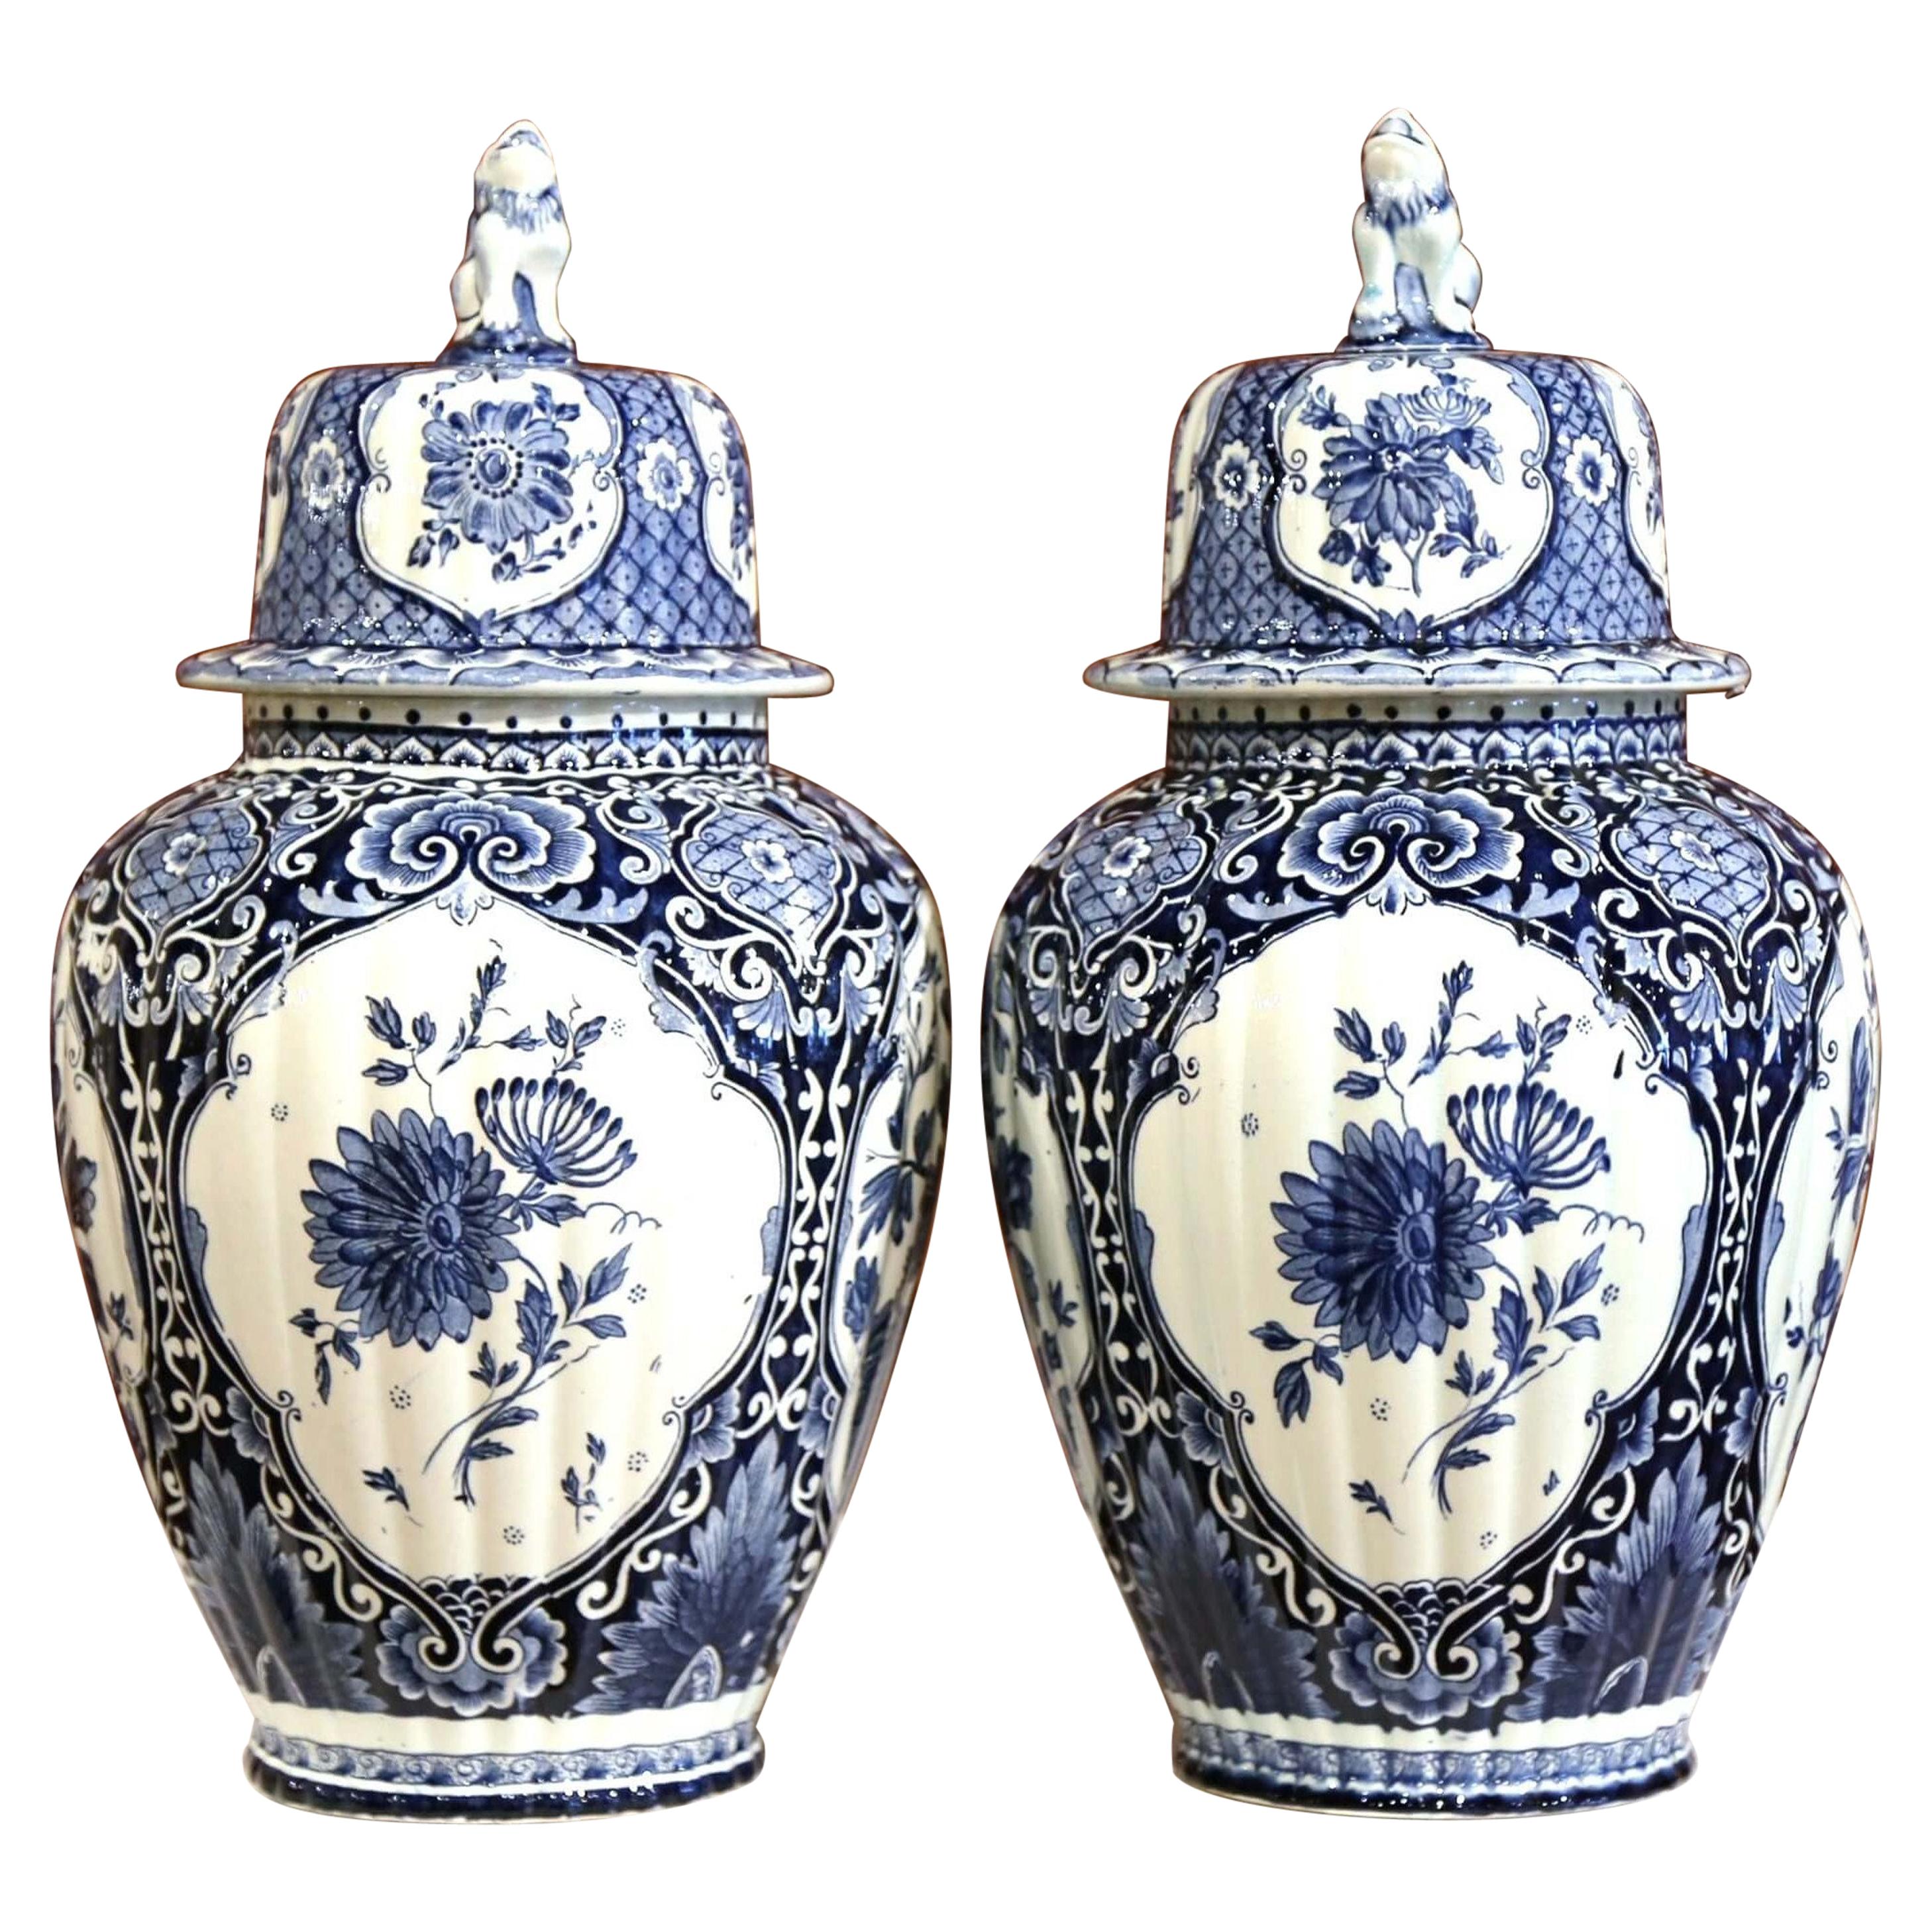 Pair of Mid-20th Century Dutch Blue and White Royal Maastricht Delft Ginger Jars